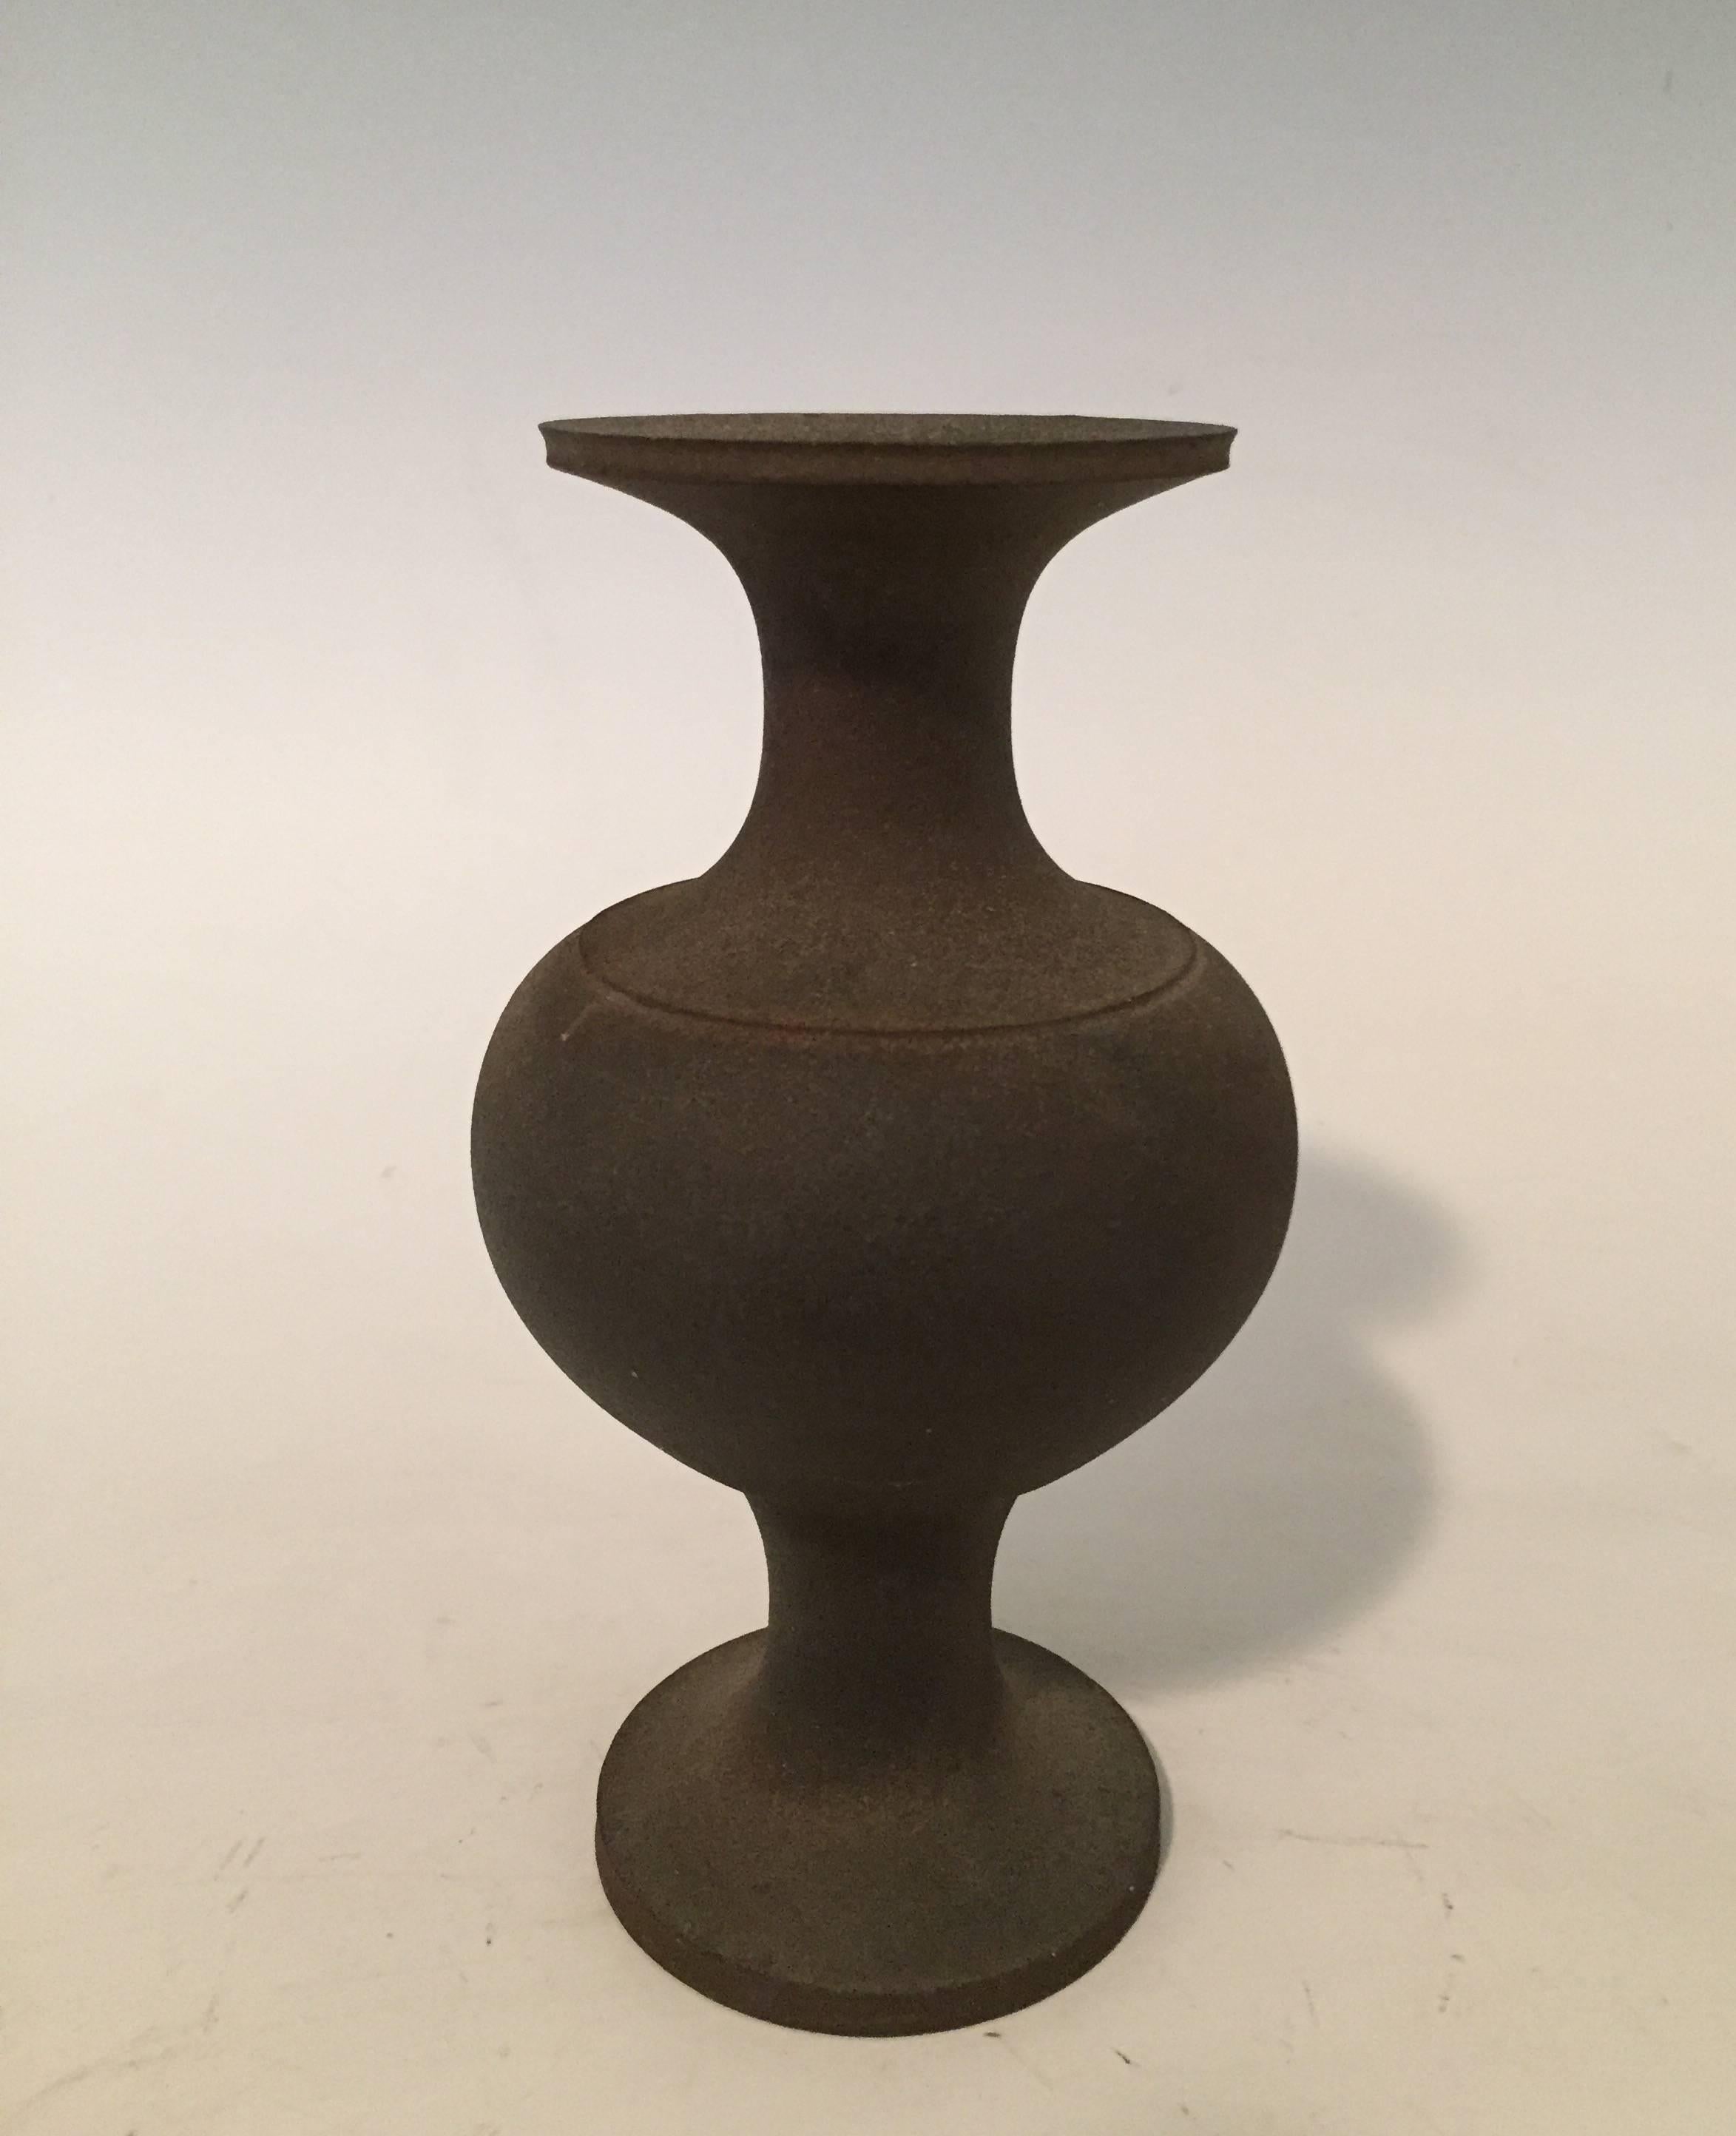 A one of a kind stoneware vase by Japanese ceramicist Koji Toda (born 1974-).
Of rounded form, this wood fired vase has a bold appearance. Inspired by bronze forms from pre 12th century water pitchers.
The beautiful sensibility of ceramics not found